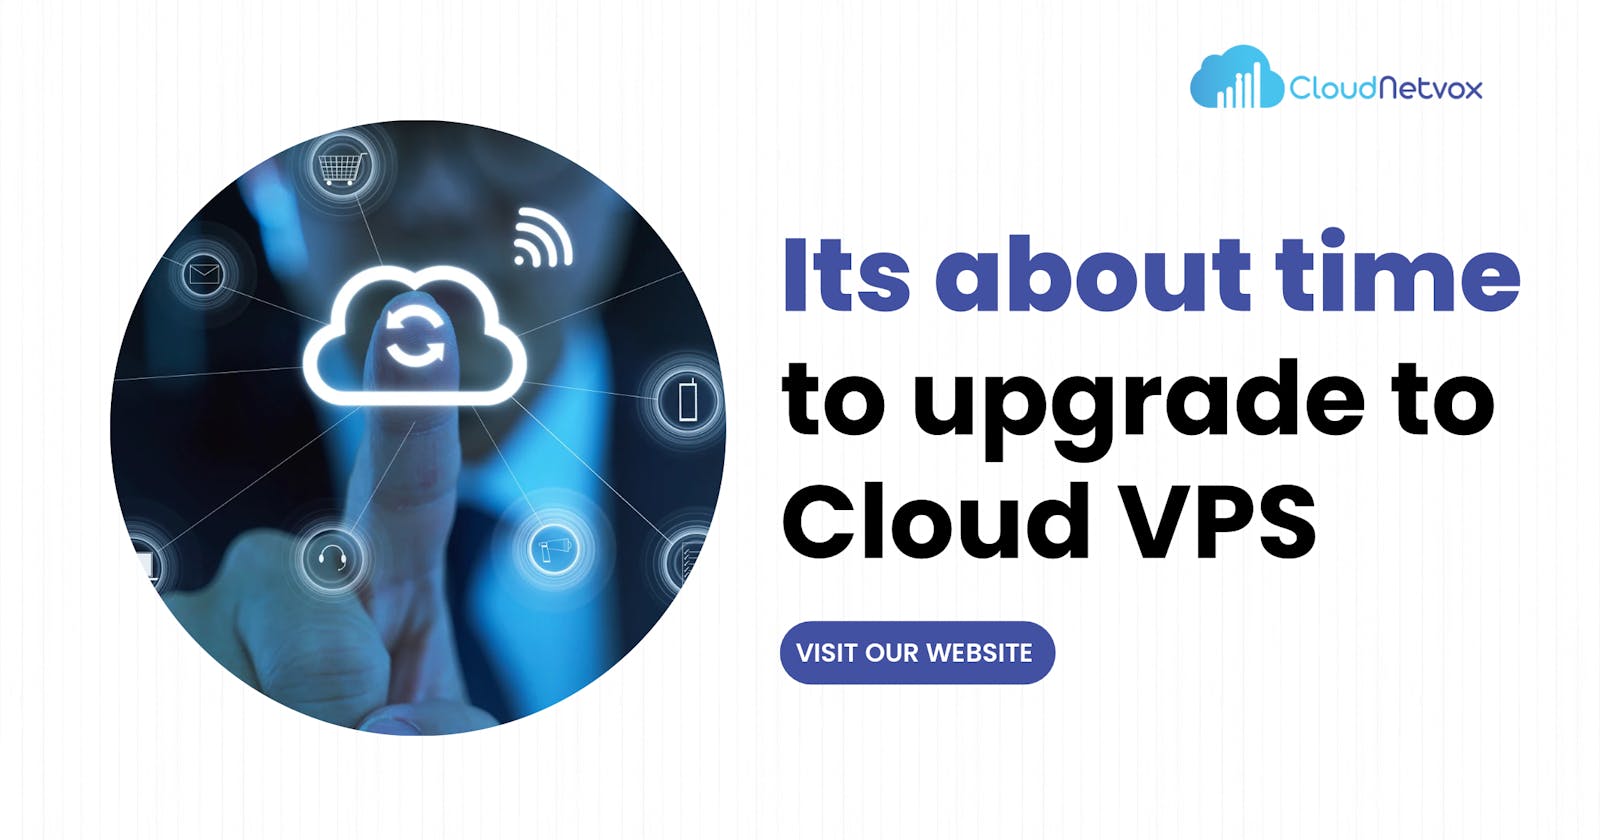 It’s about time to upgrade to Cloud VPS.